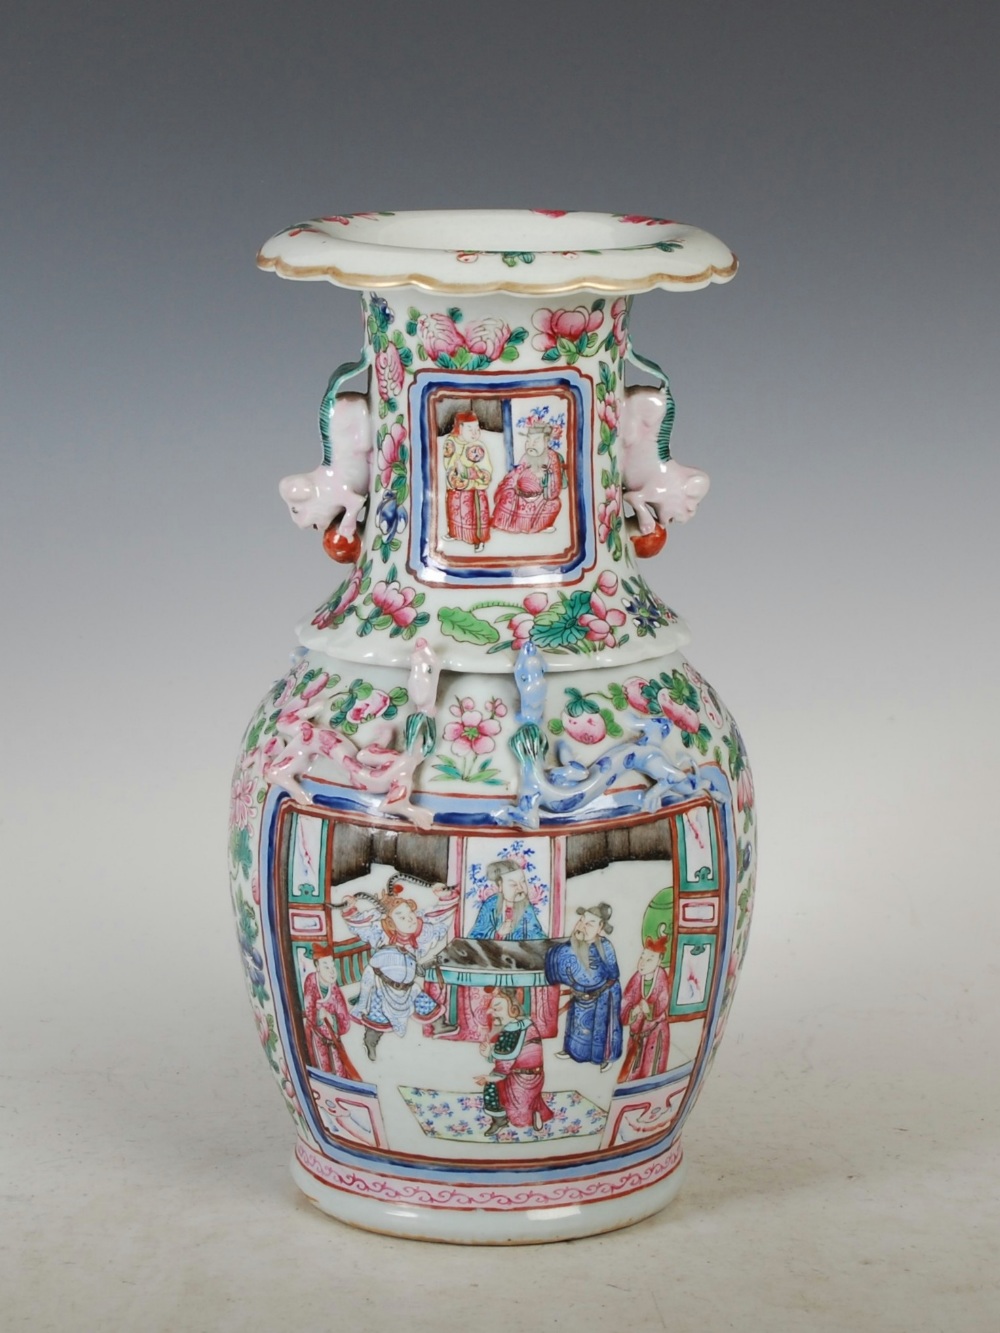 A Chinese porcelain famille rose vase, Qing Dynasty, decorated with panels of Court figures, the